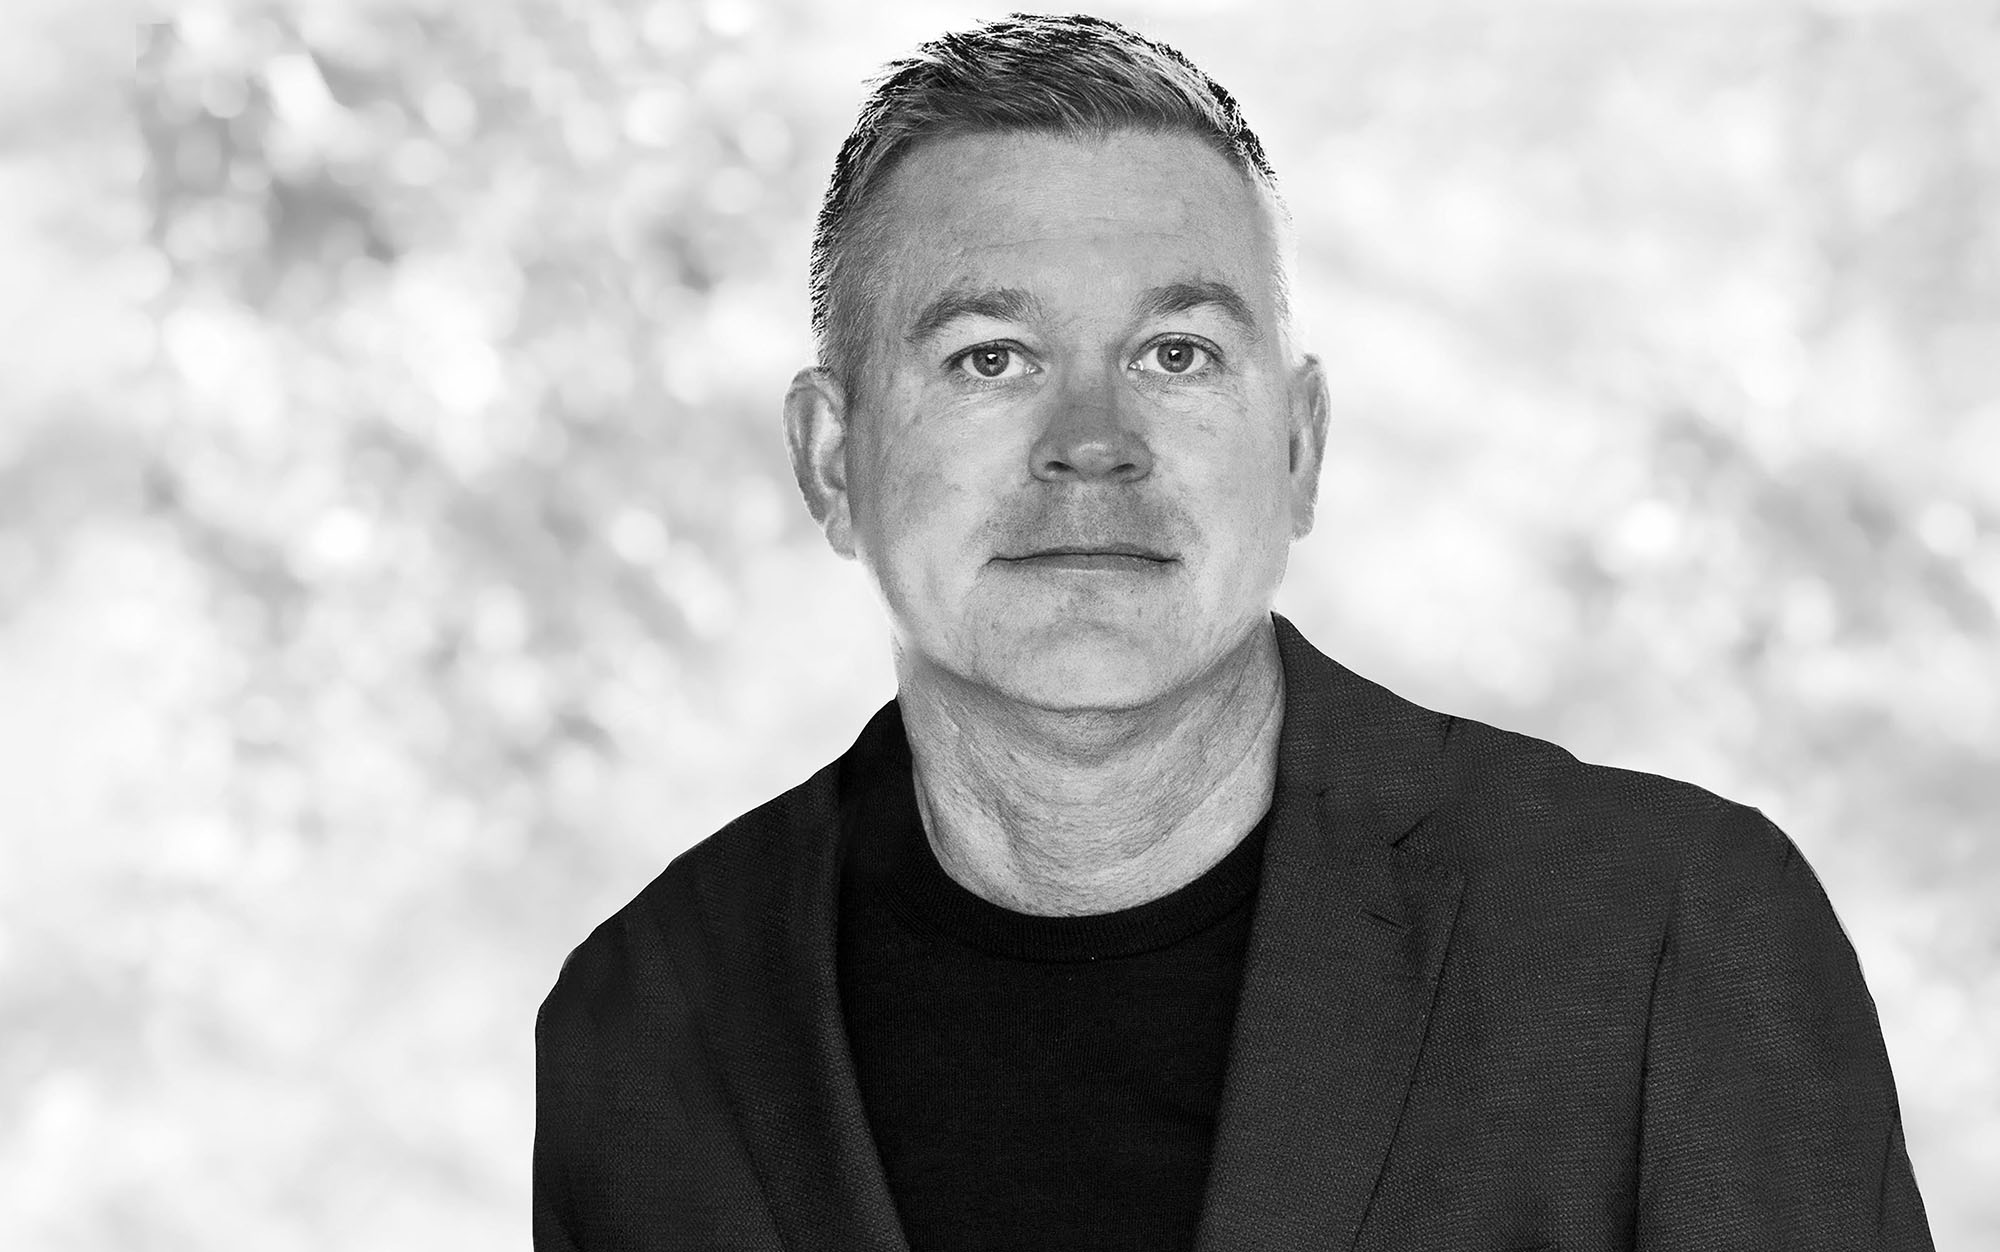 Boosting Bright Sunday expansion with a new sales organization - New Chief Executive - Daniel Nilsson